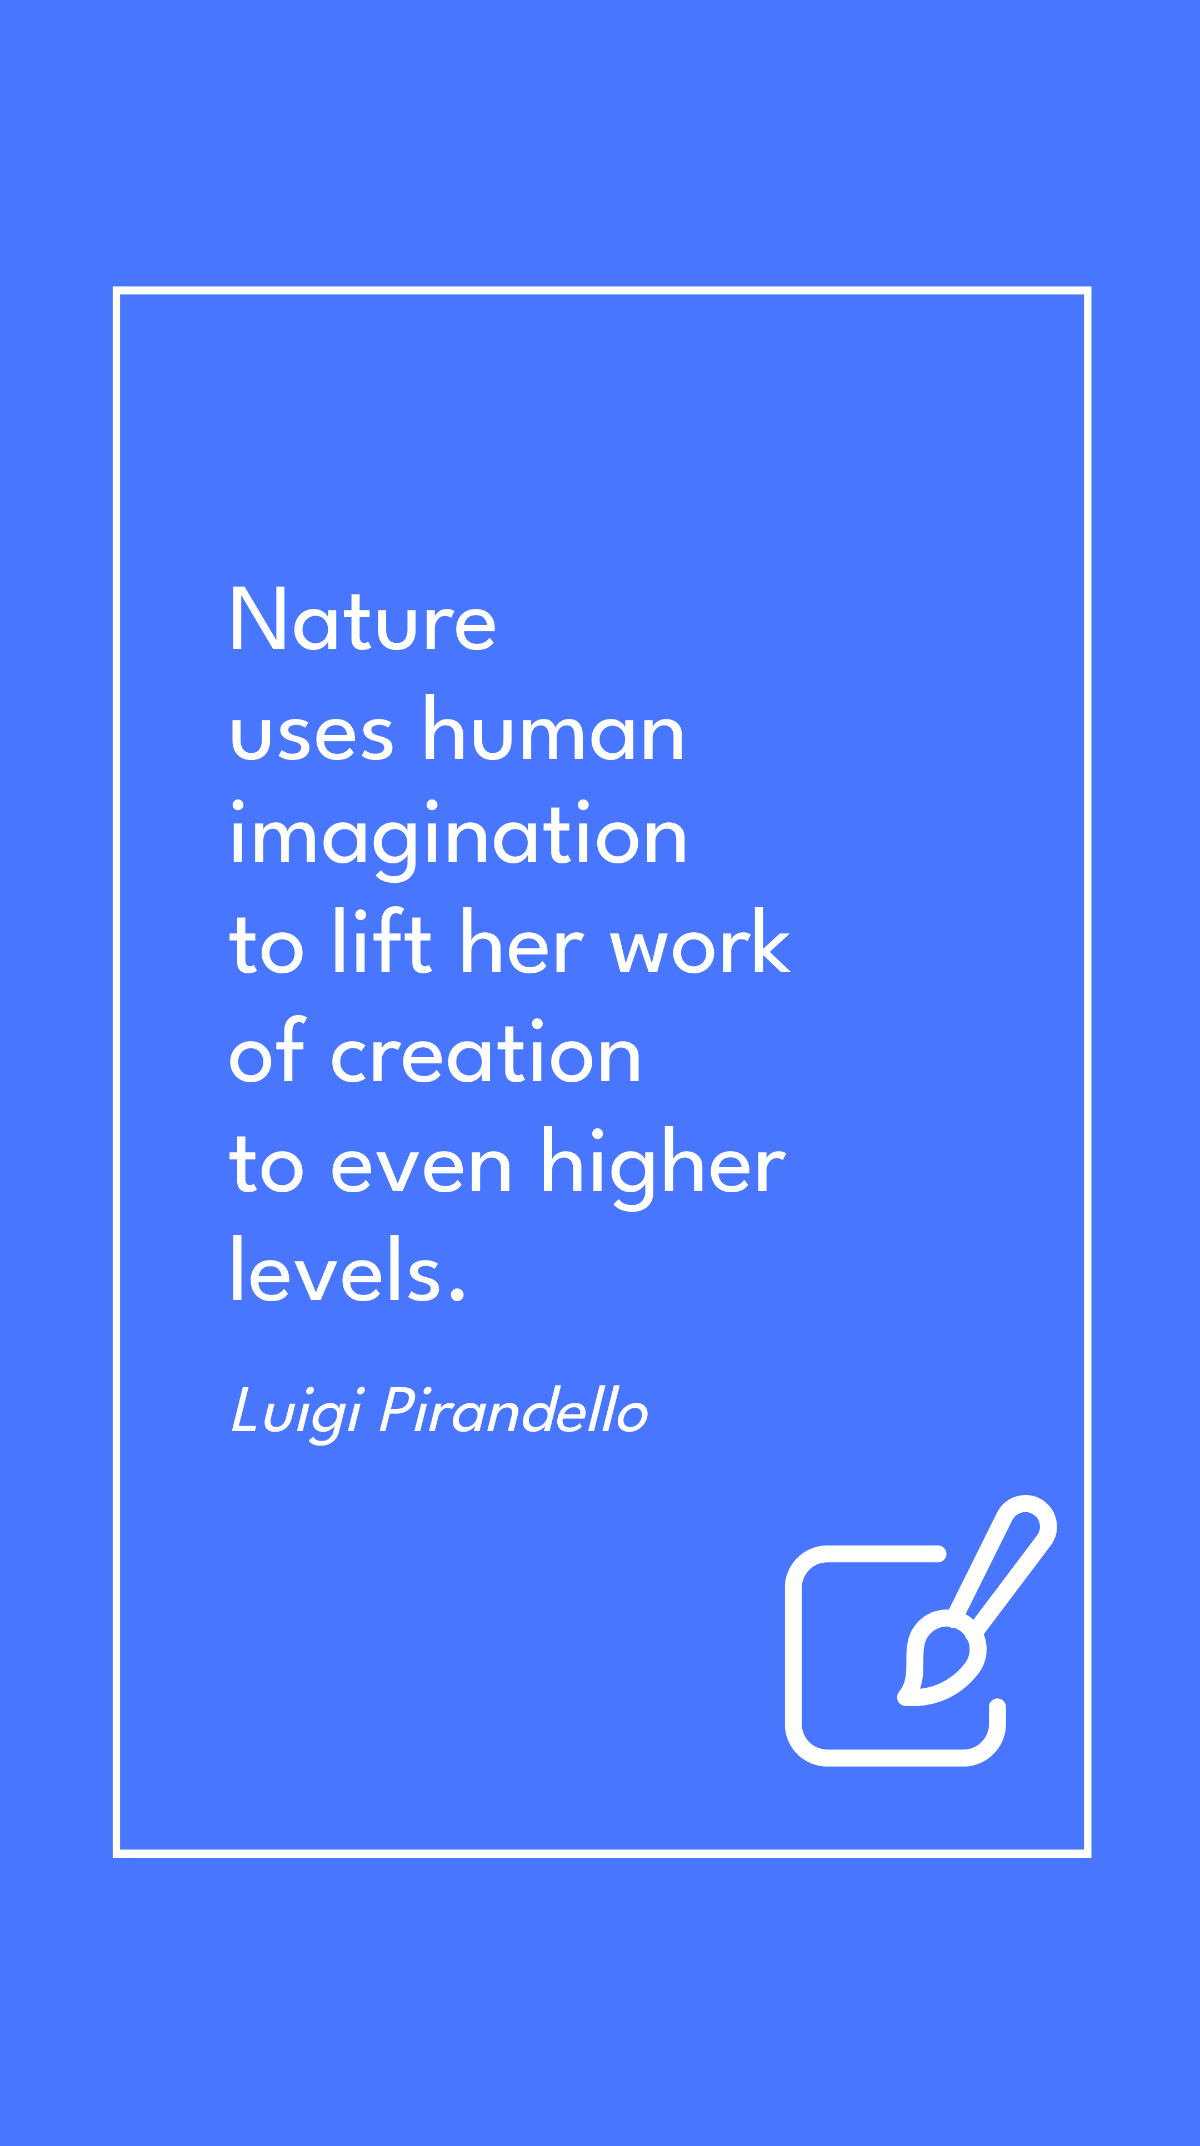 Luigi Pirandello - Nature uses human imagination to lift her work of creation to even higher levels.